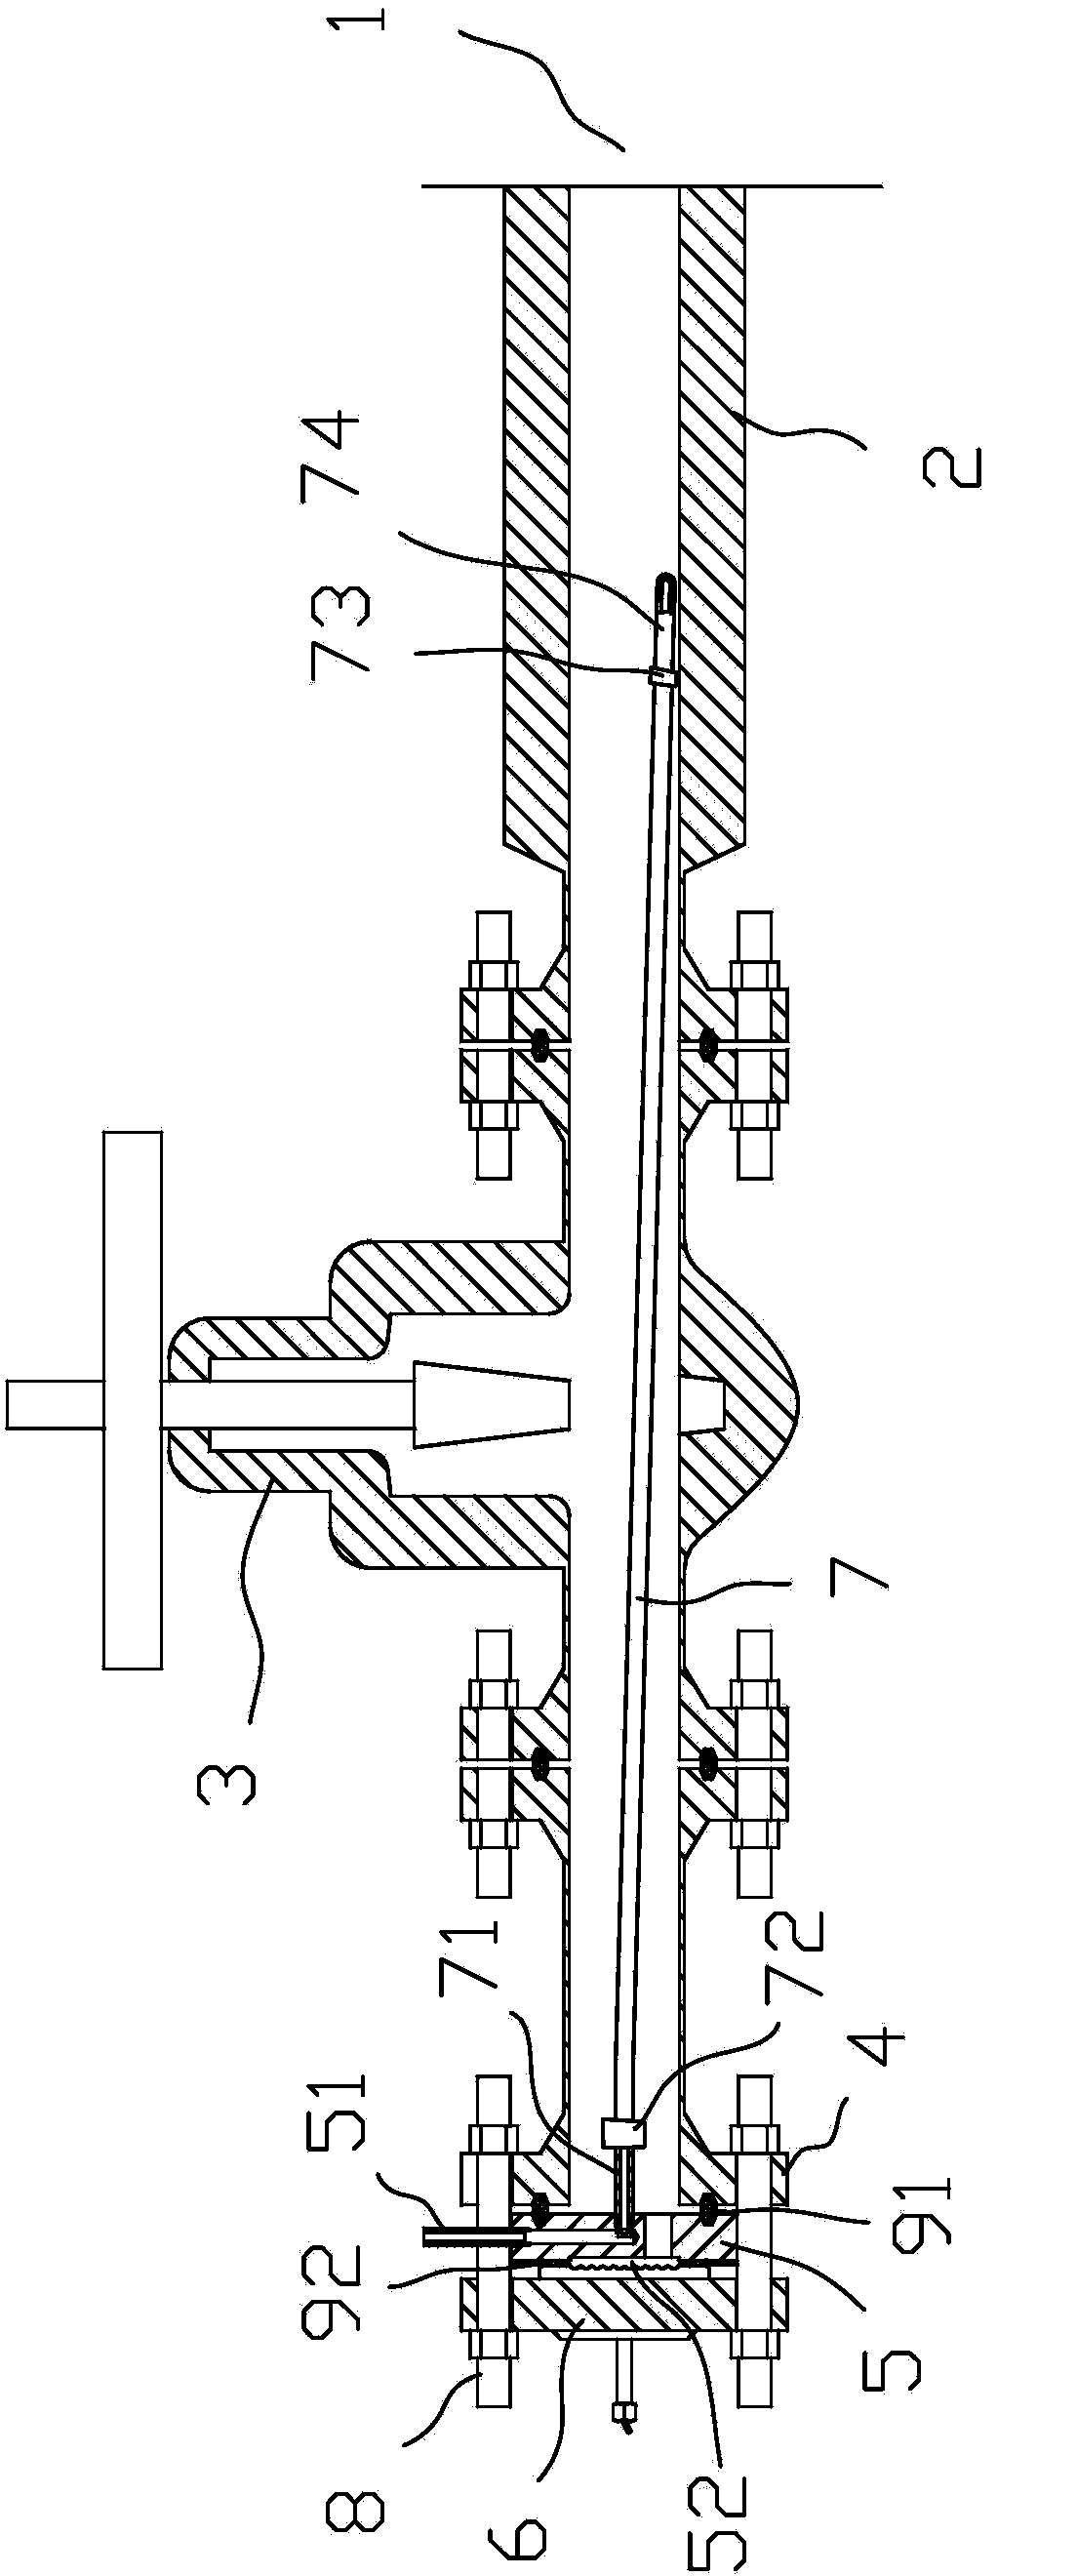 Liquid level anti-blocking device for chilling chamber of gasification furnace